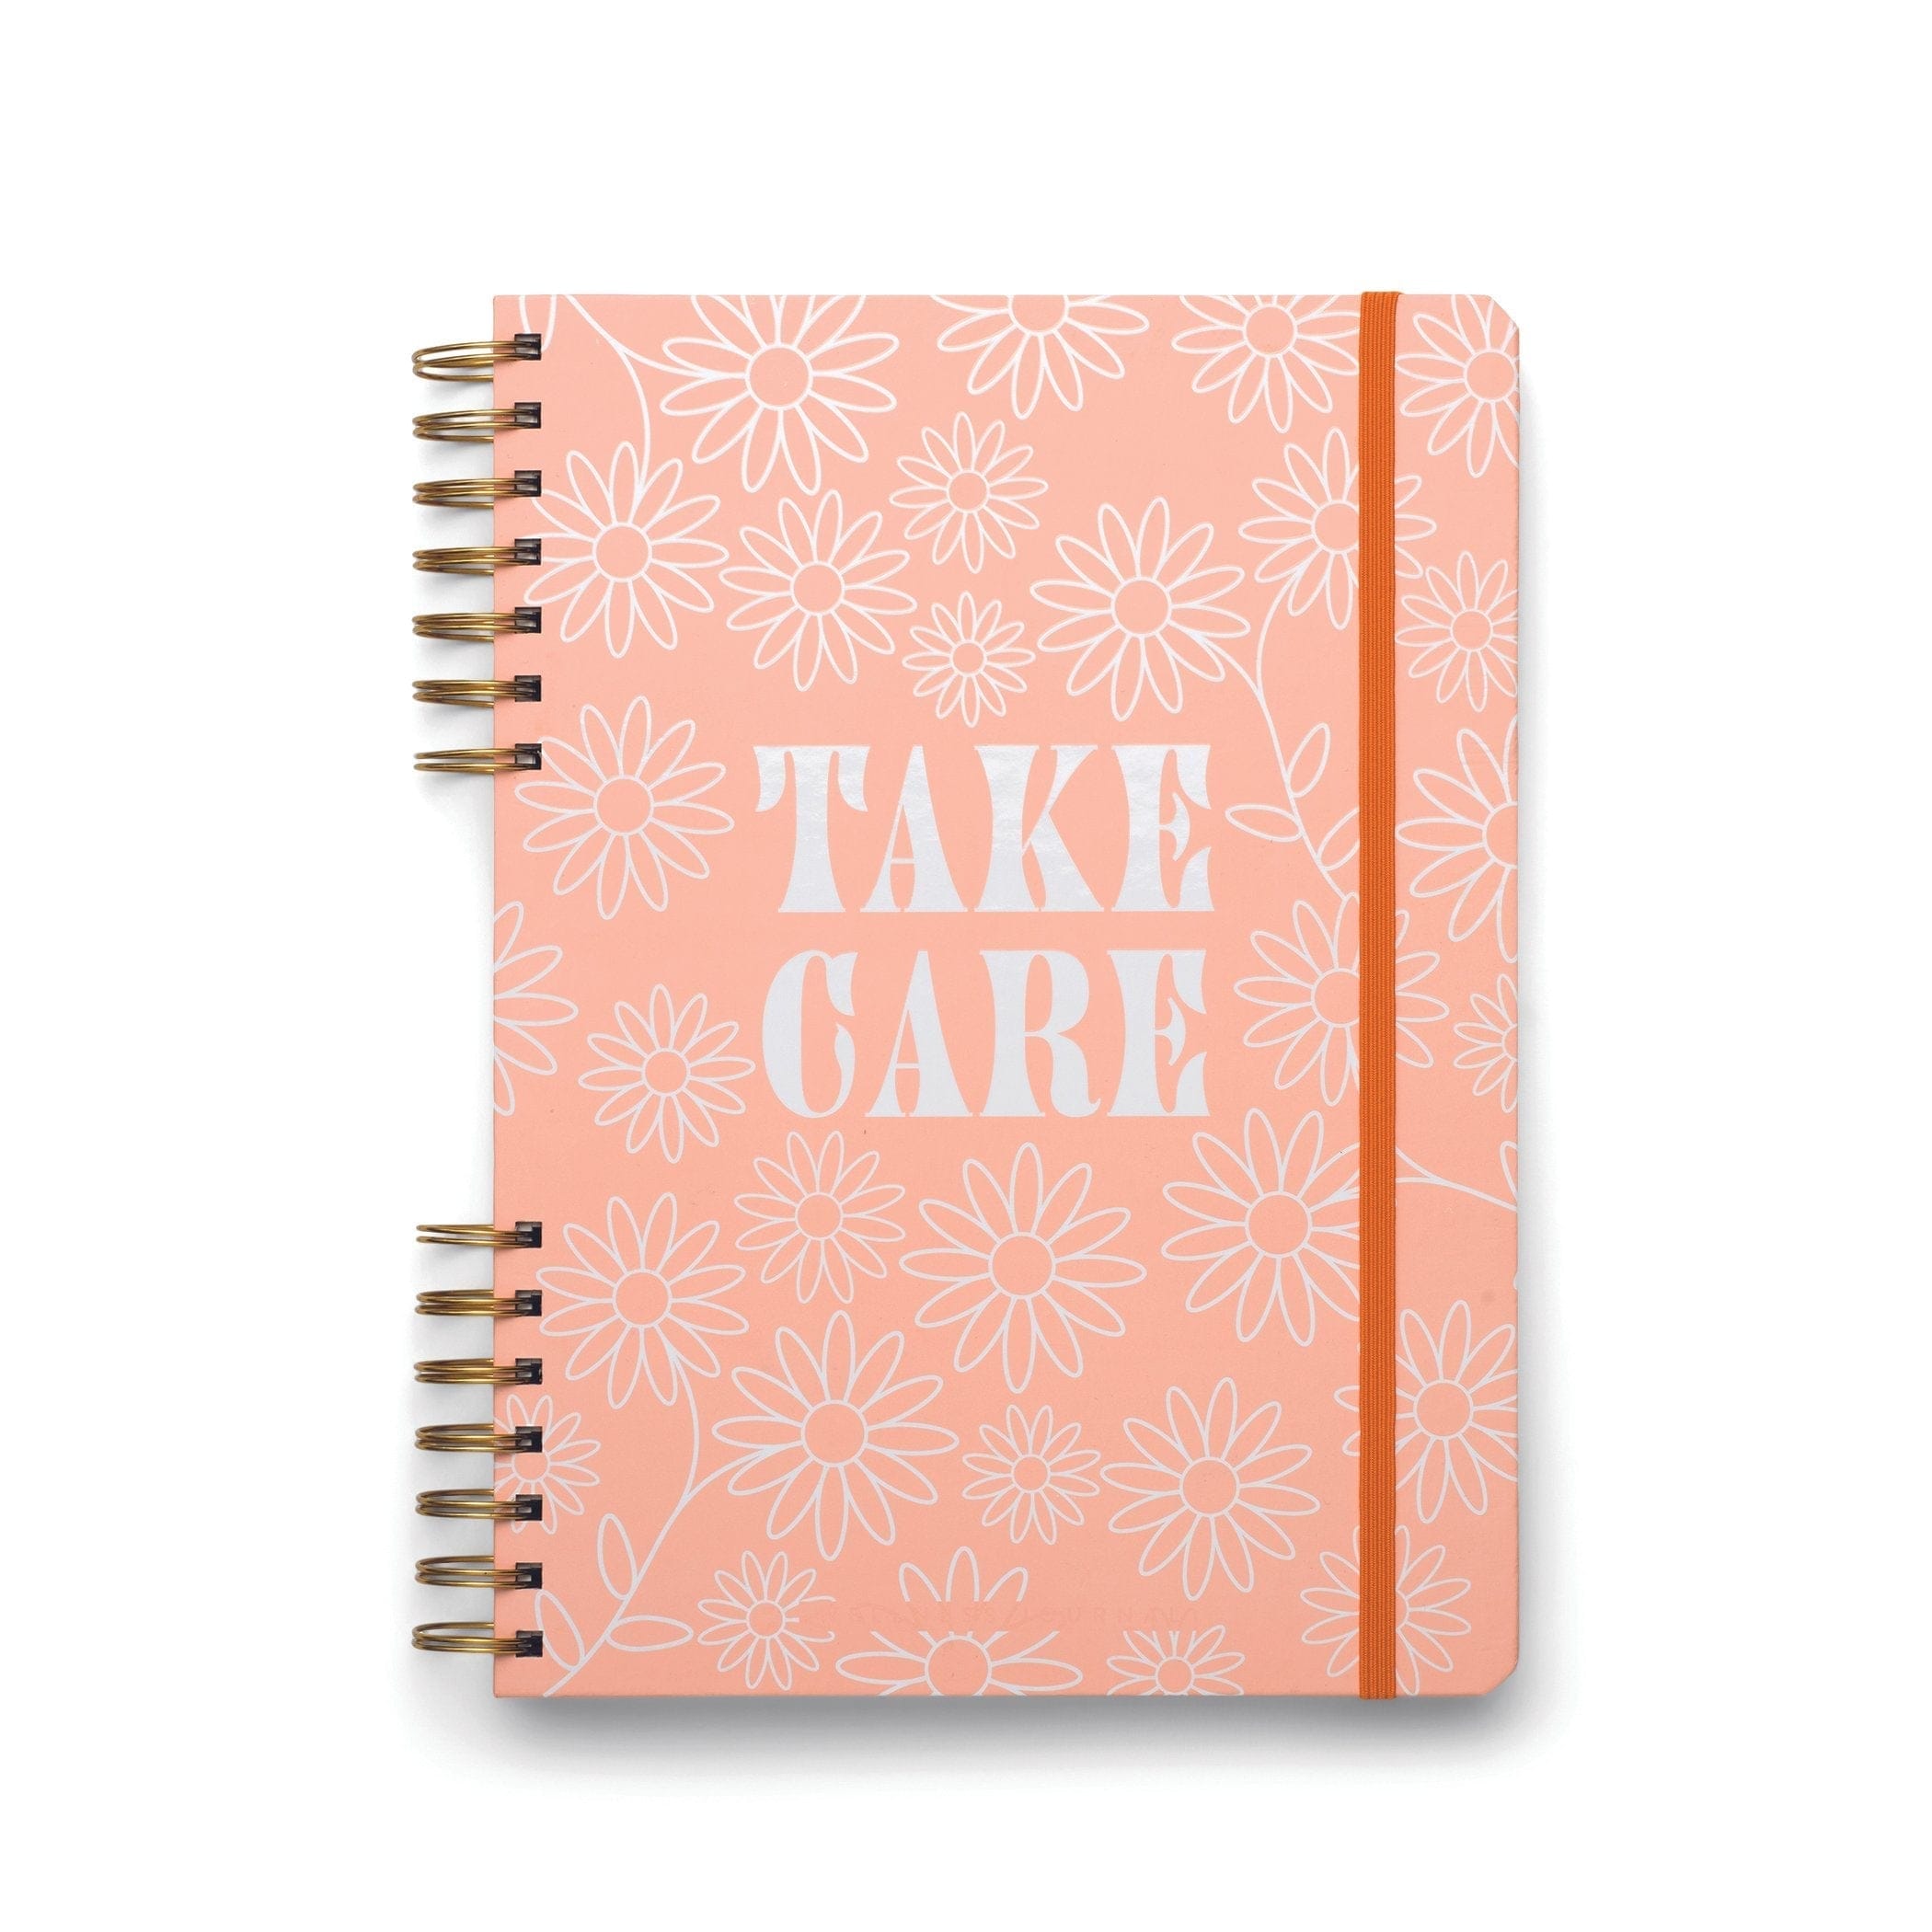 Take Care' Guided Wellness Journal for Sale – Body Mind & Soul Houston